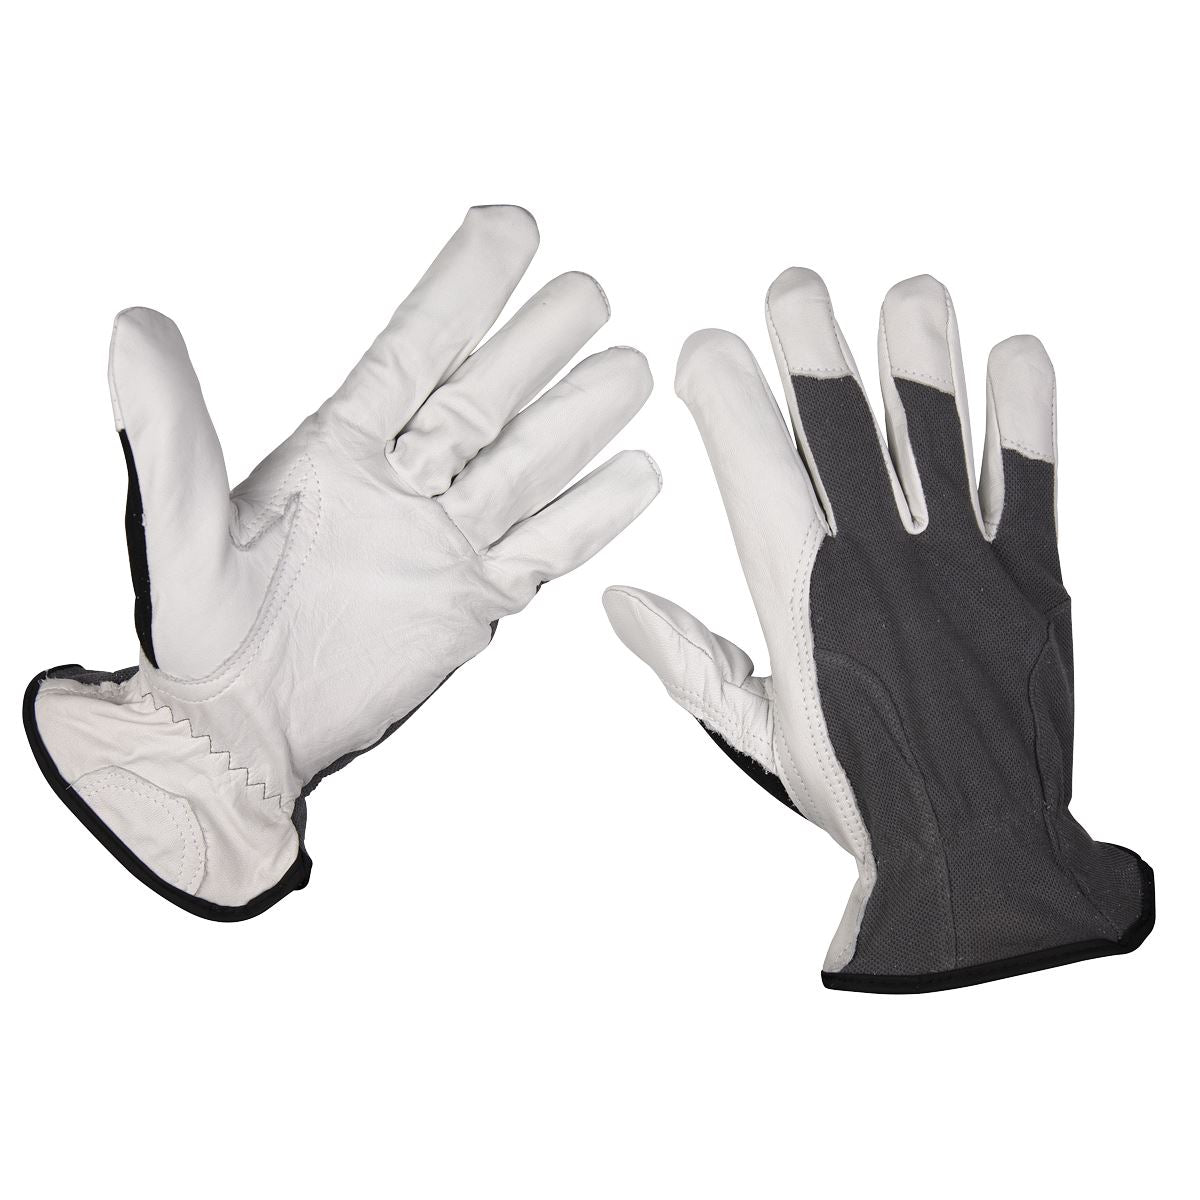 Worksafe by Sealey Super Cool Hide Gloves Large - Pair